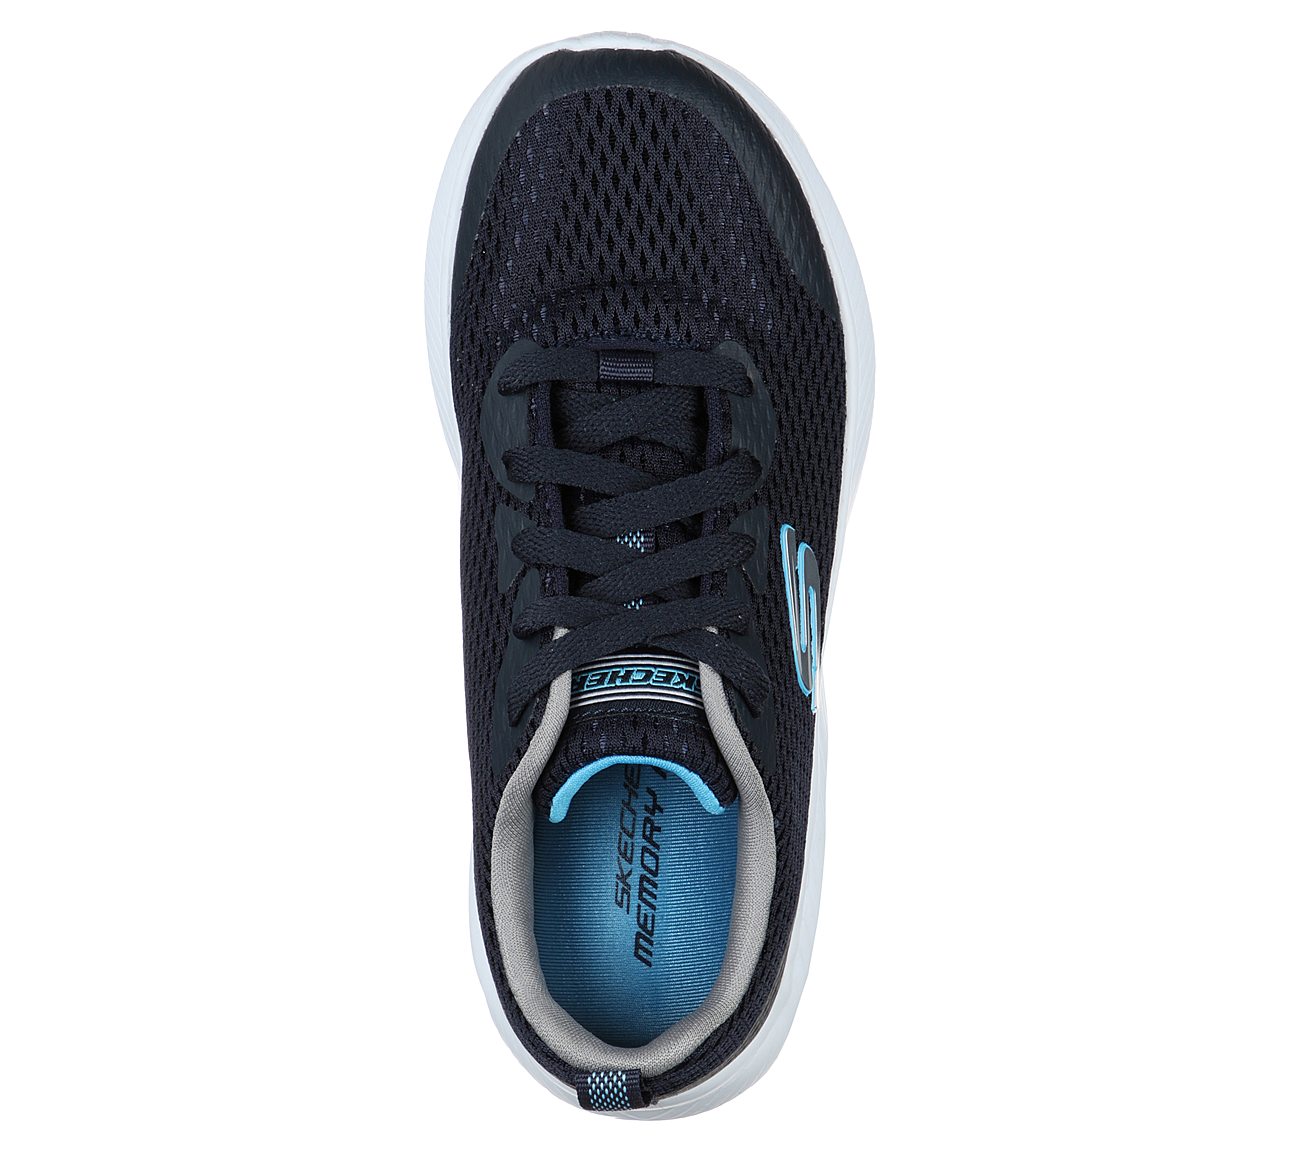 DYNA-AIR - QUICK PULSE, NAVY/BLUE Footwear Top View